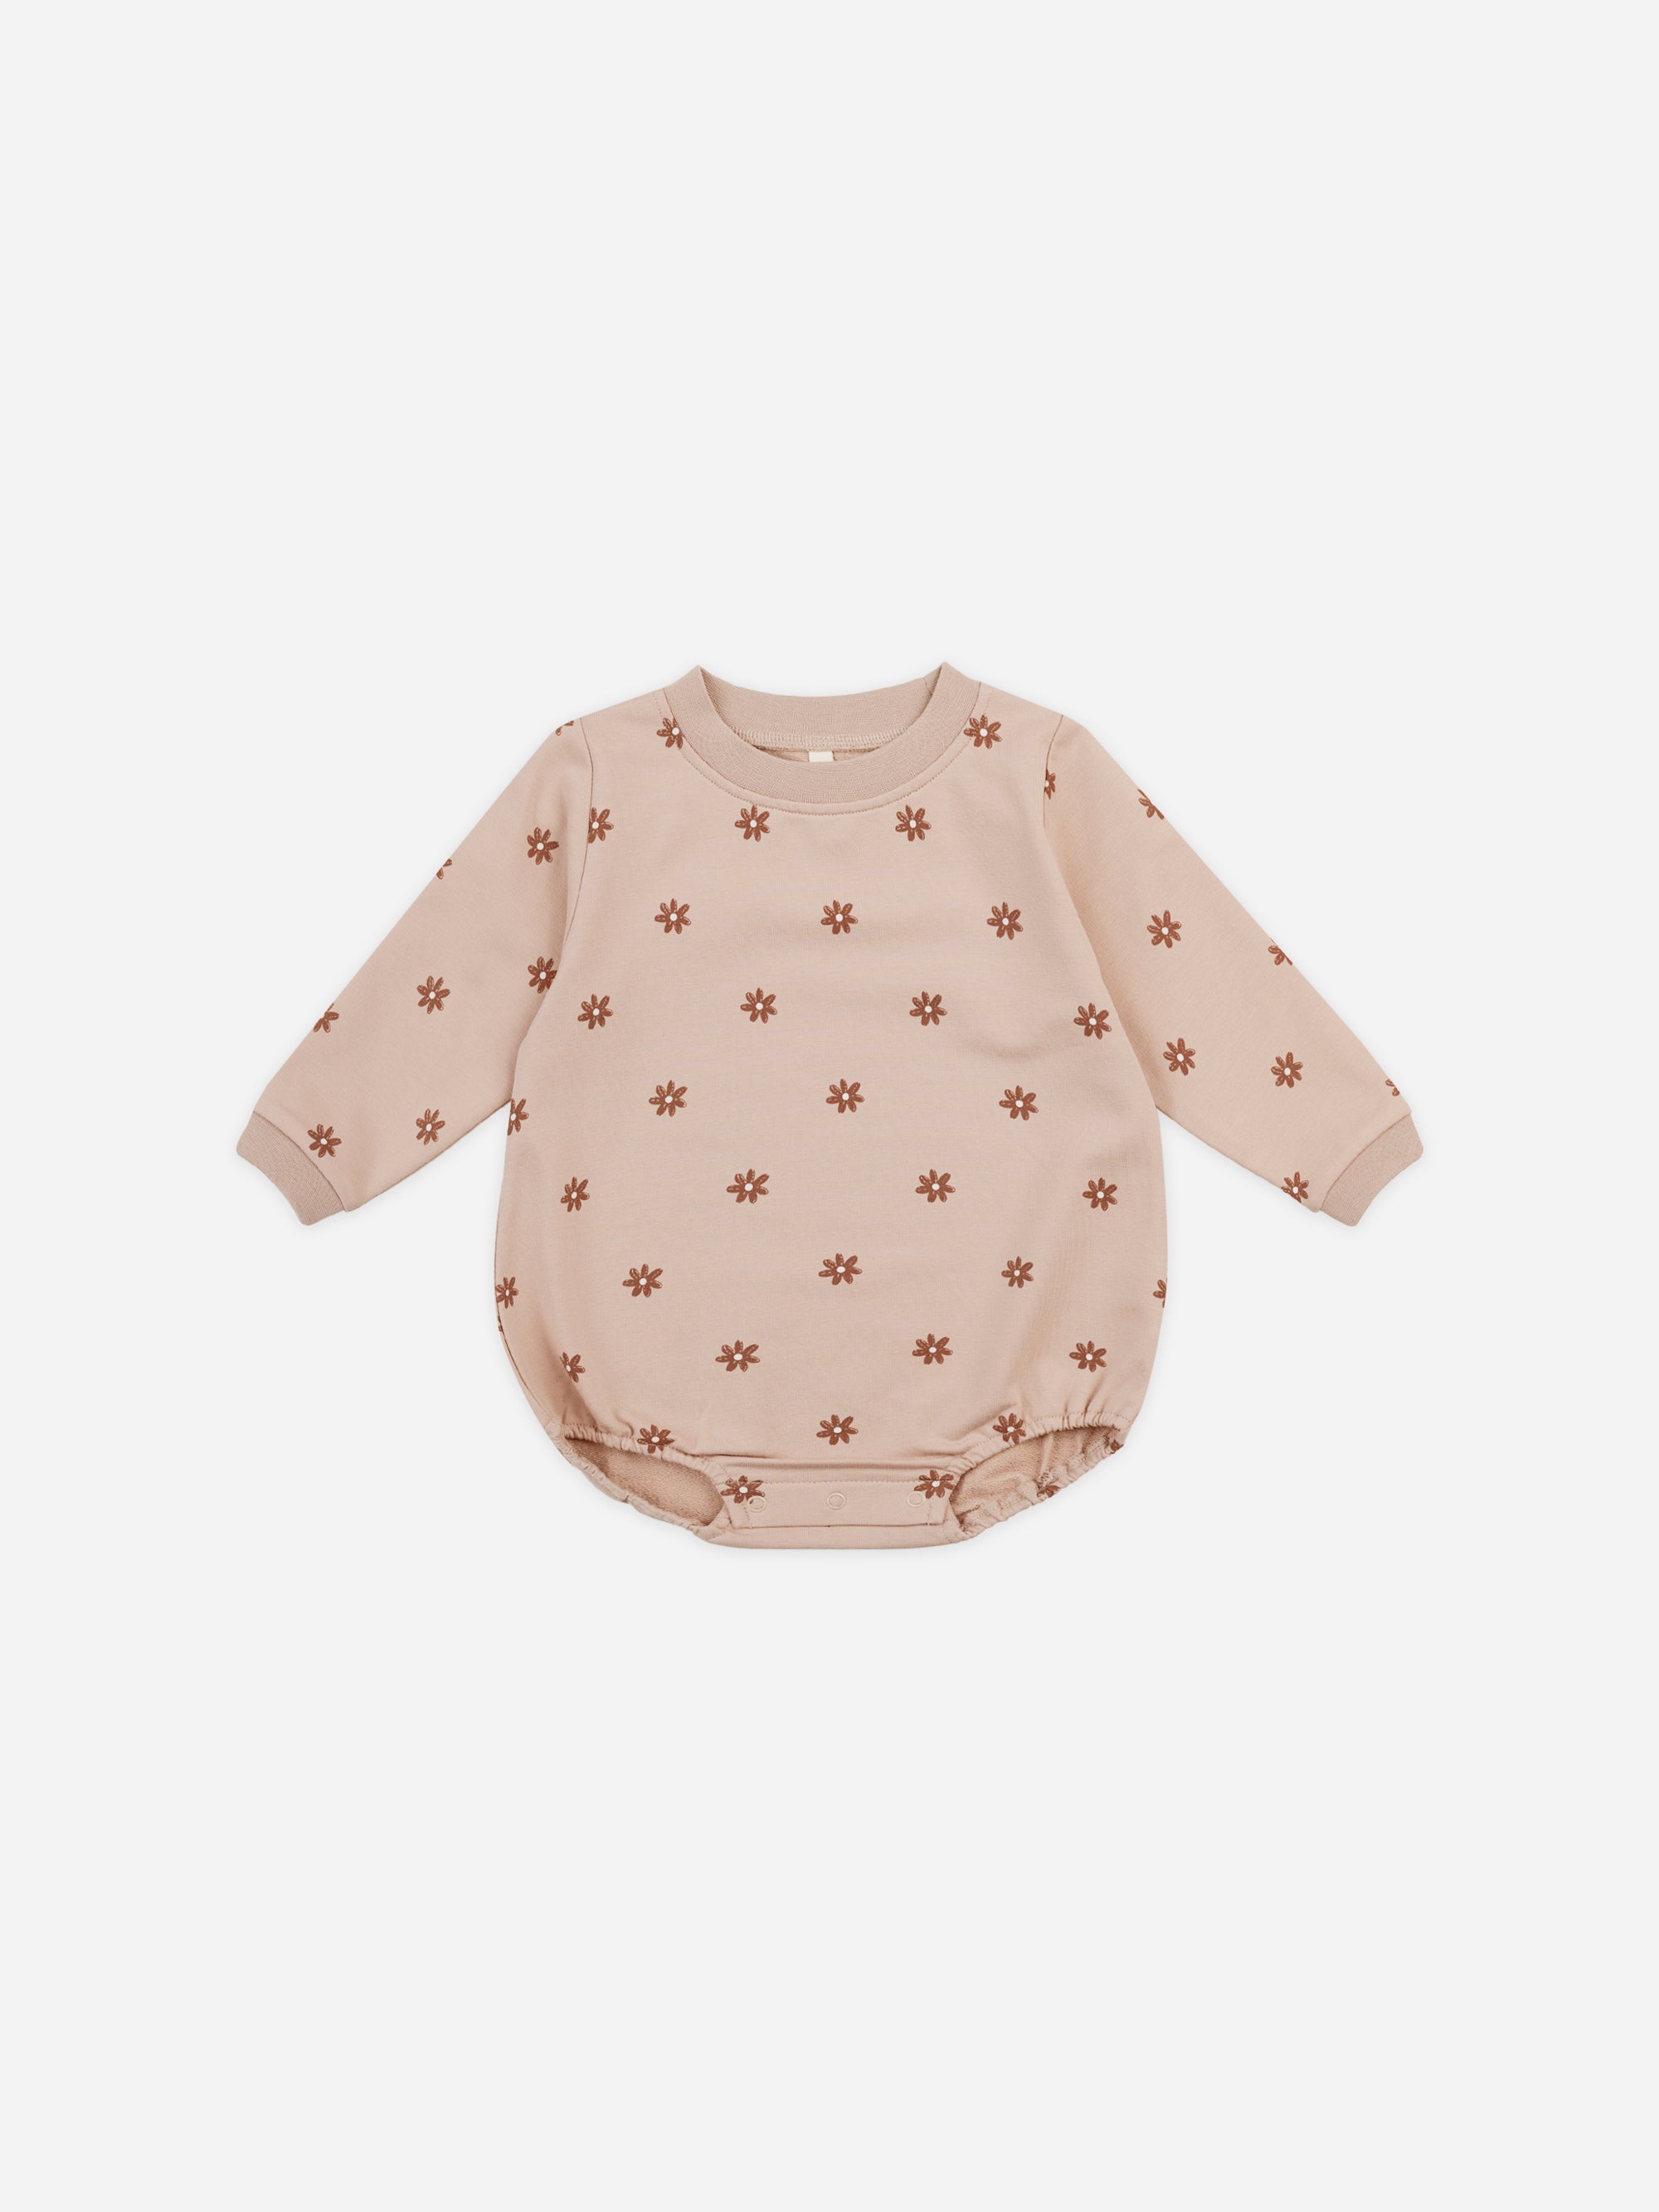 Crewneck Bubble Romper || Daisies - Rylee + Cru | Kids Clothes | Trendy Baby Clothes | Modern Infant Outfits |